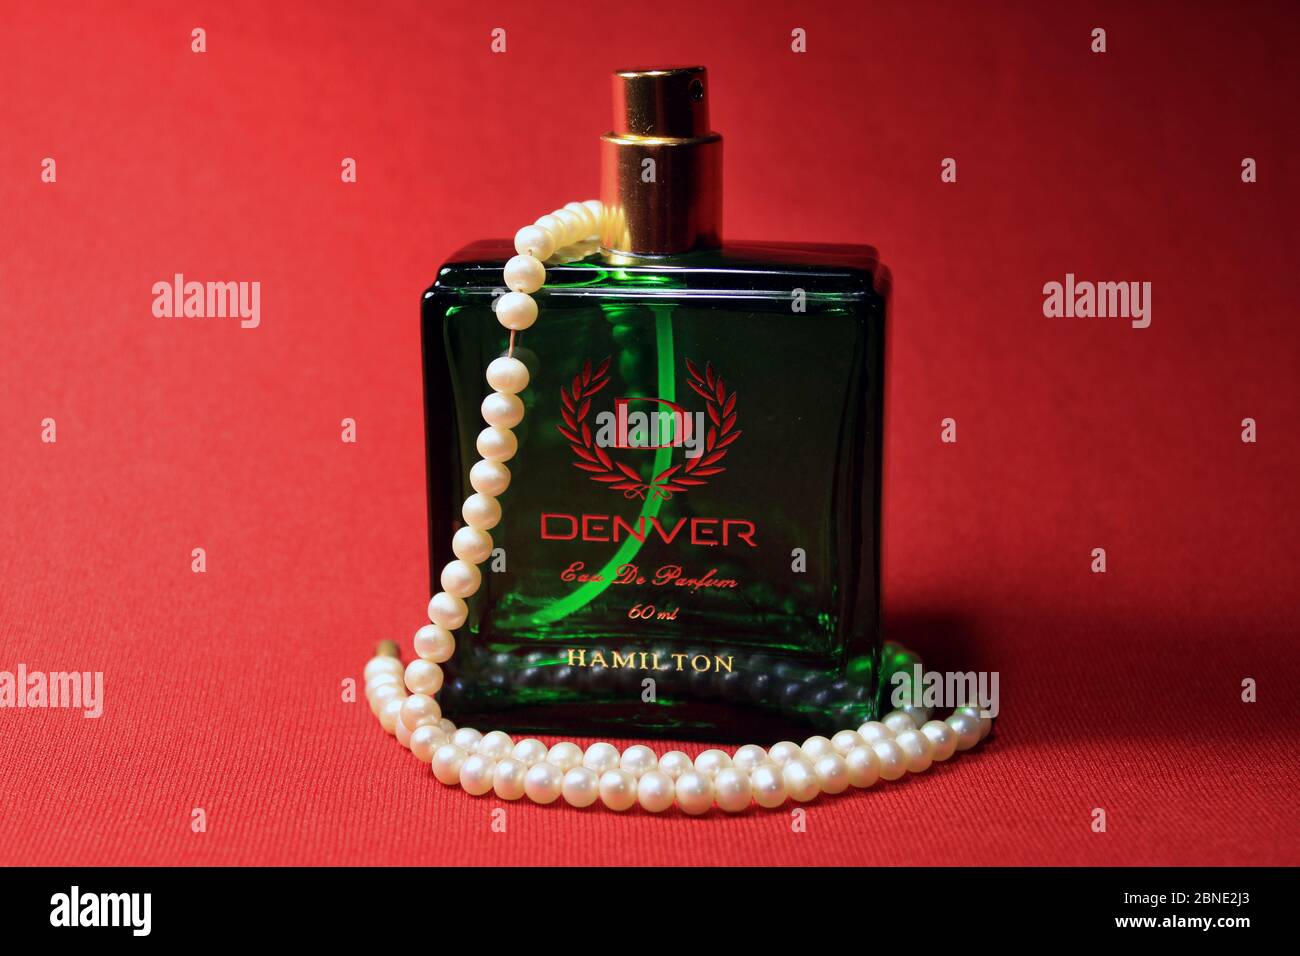 Green color perfume bottle isolated on red background. Denver Hamilton  Perfume For Men Stock Photo - Alamy